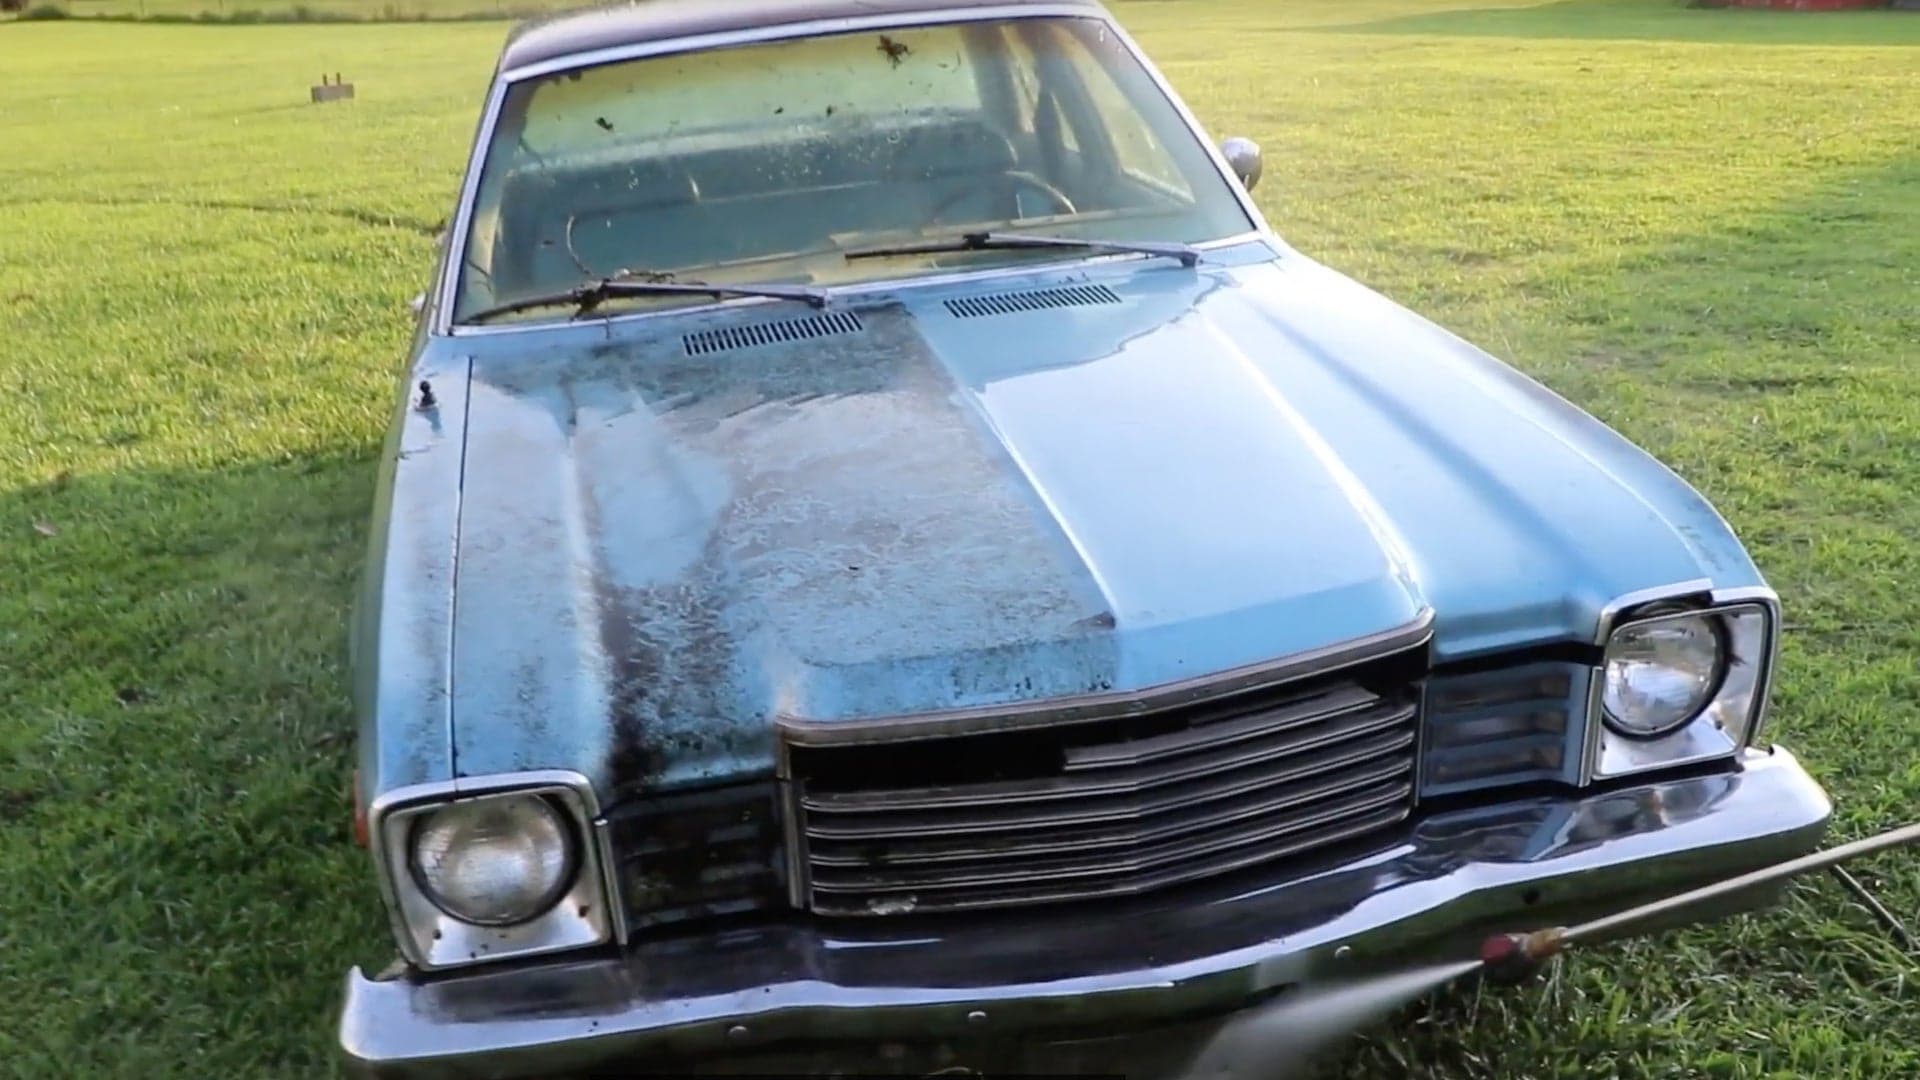 Watching This Filthy Dodge Sedan Get Pressure Washed After 17 Years Is Extremely Satisfying